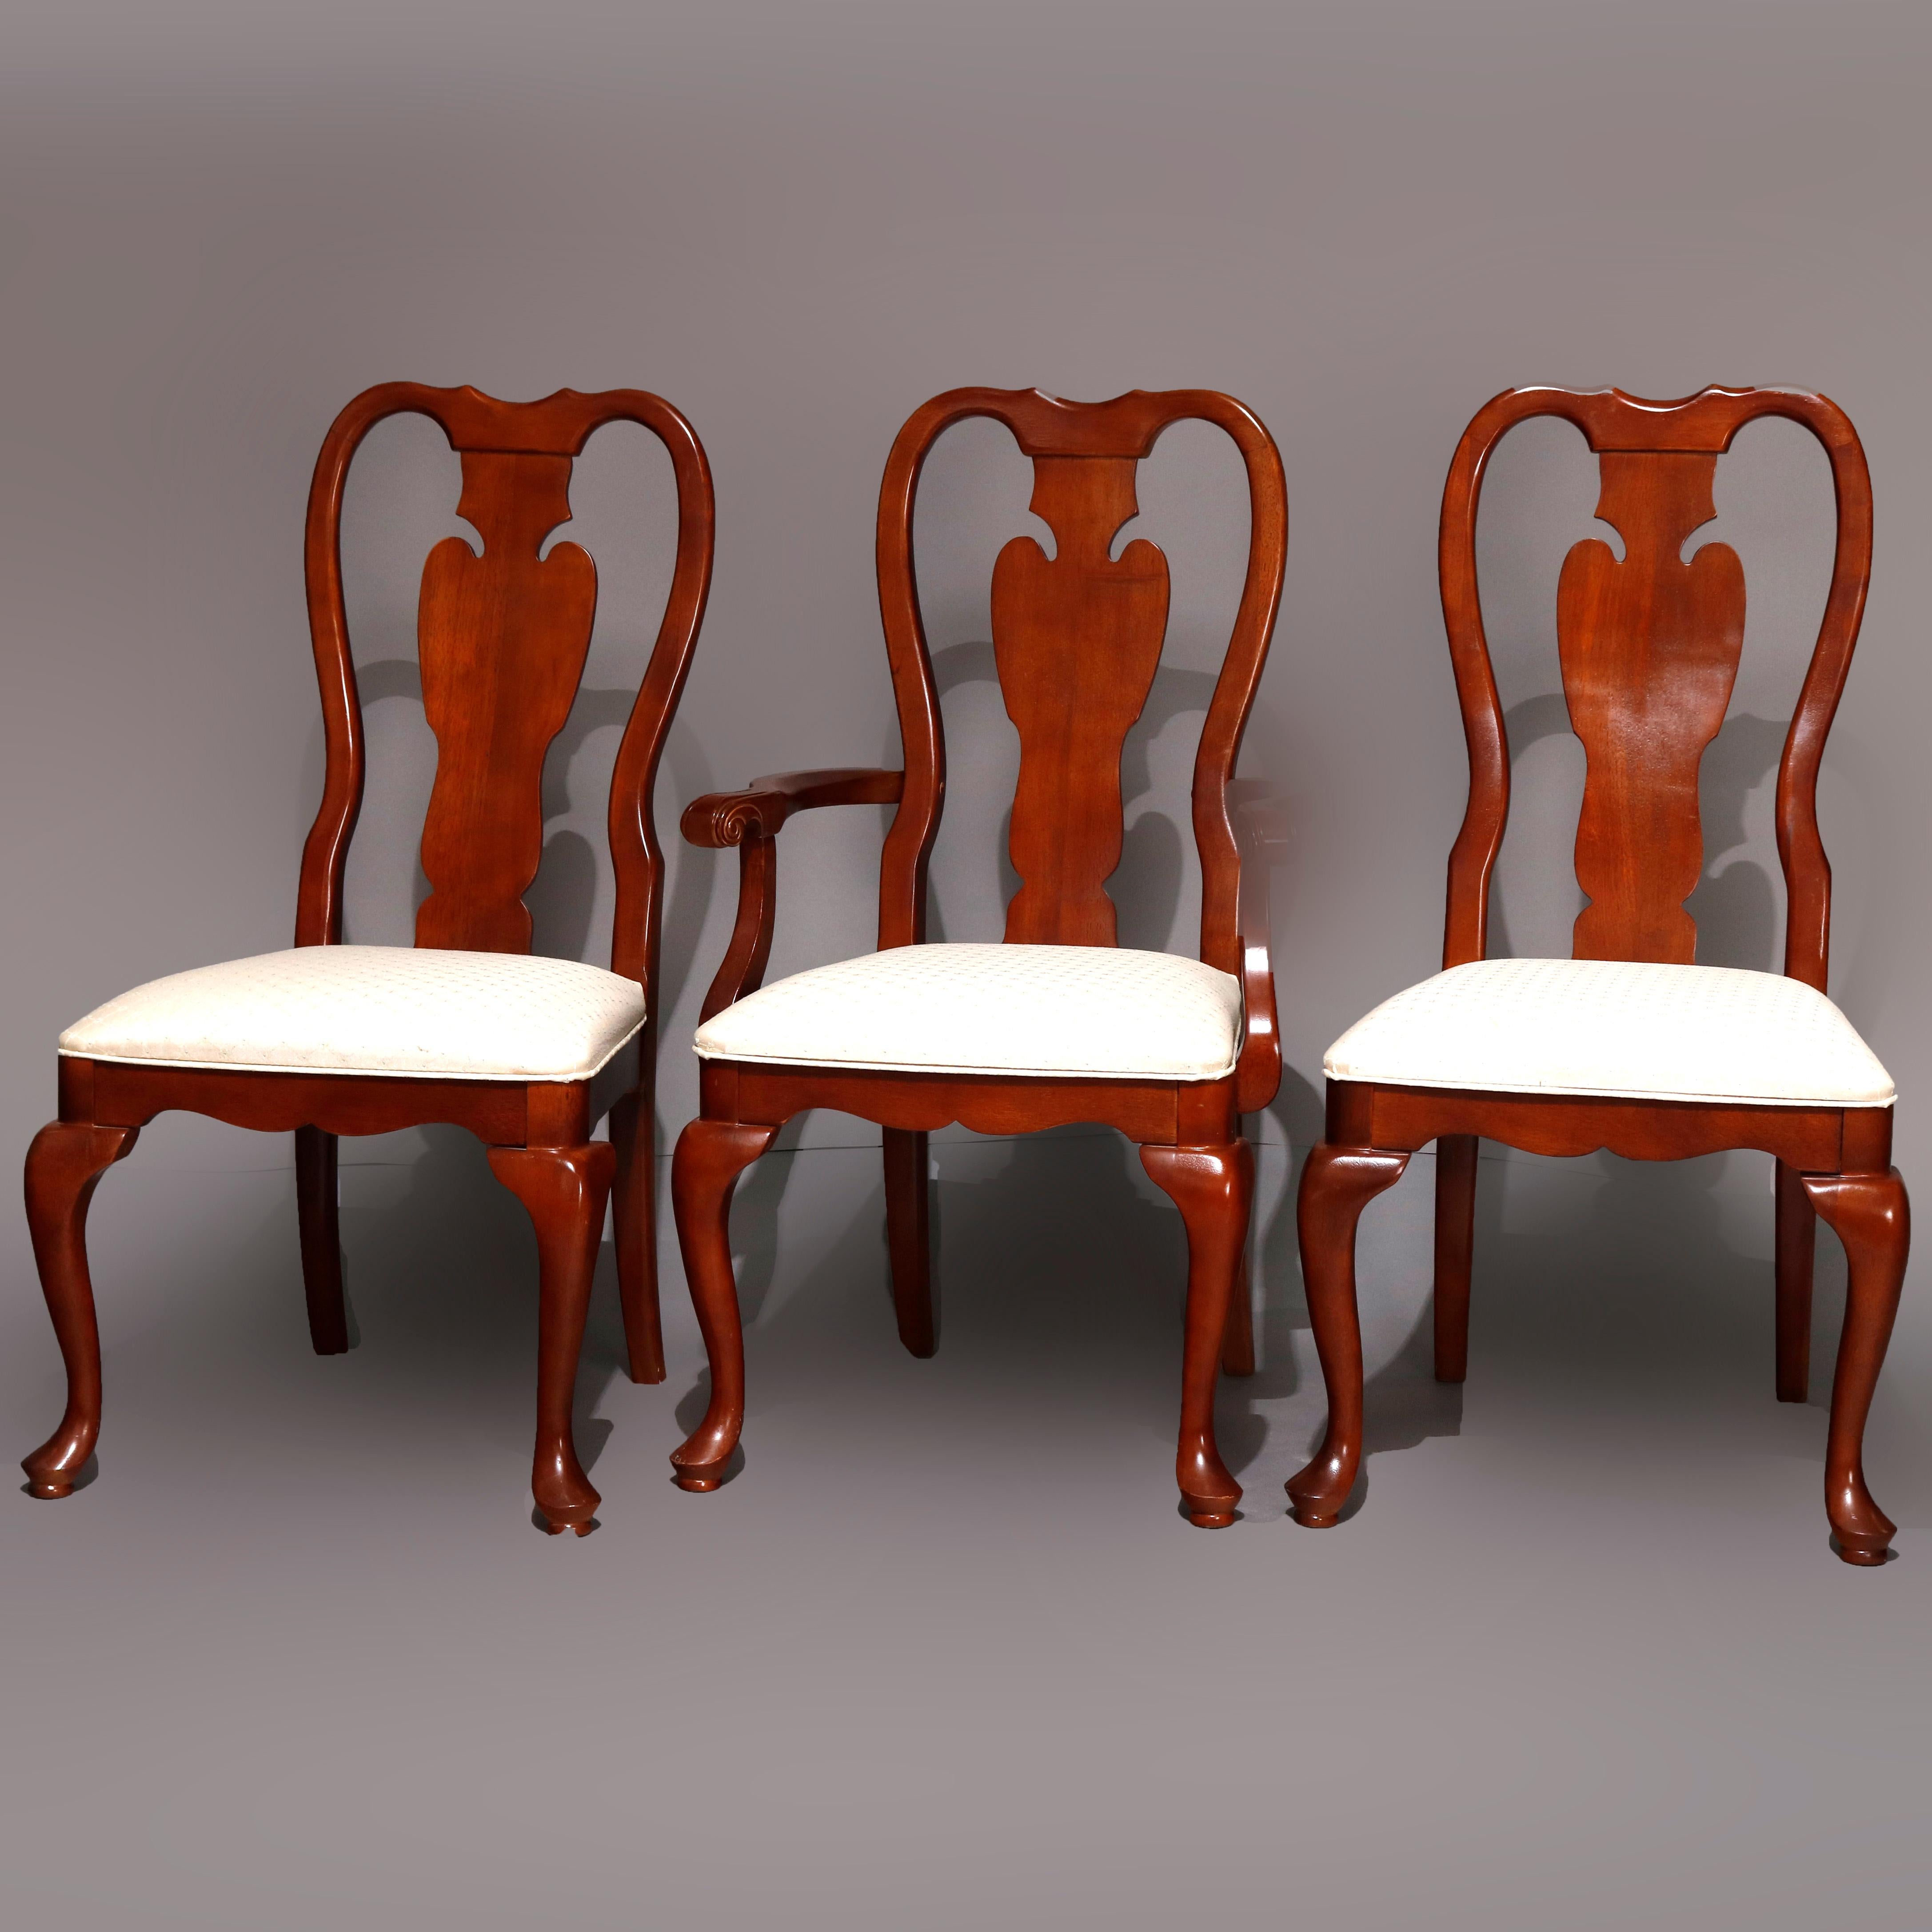 A vintage set of 6 dining chairs by Universal Furniture in the manner of Pennsylvania House offer cherry construction in Queen Anne styling with backs having shaped rail and stylized urn slat backs over upholstered seats raised on cabriole legs with